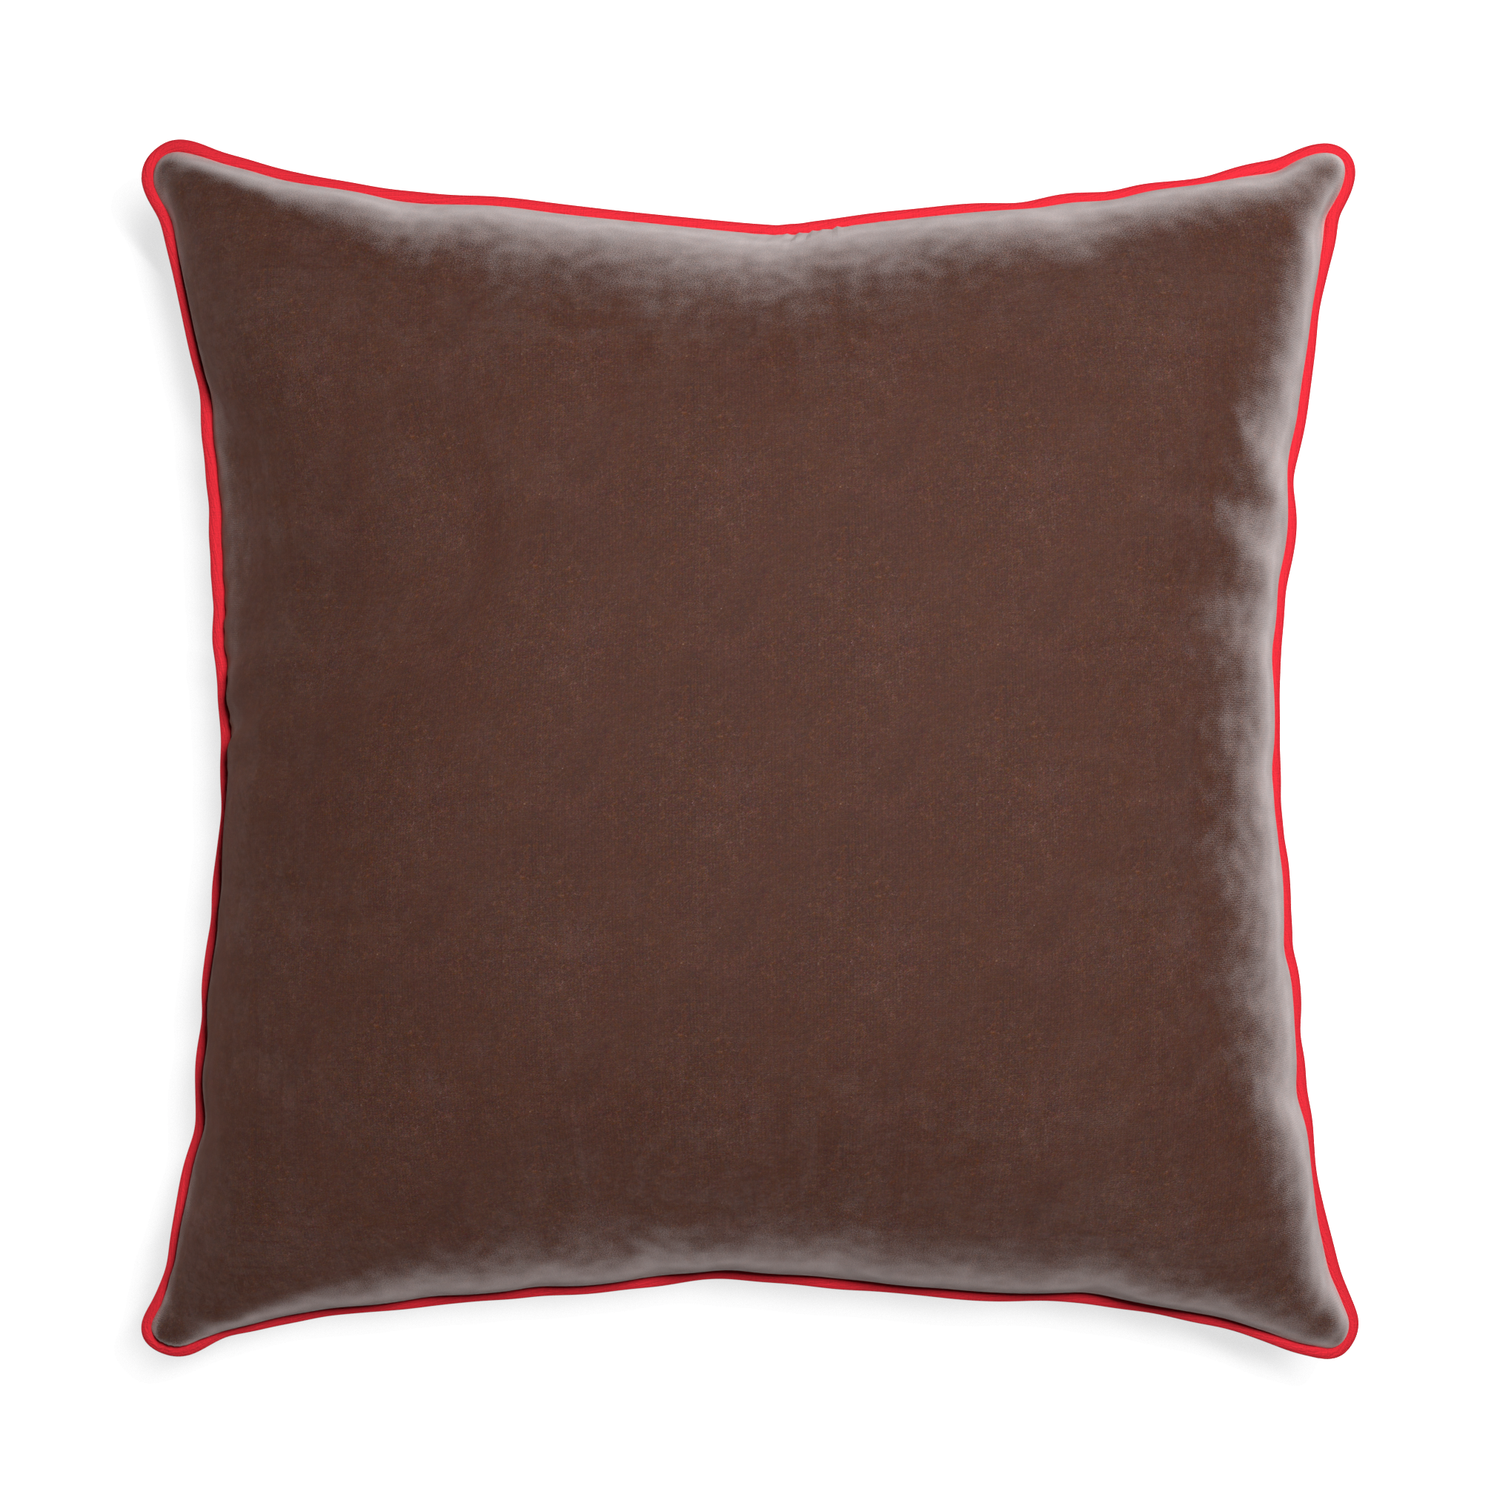 square brown velvet pillow with red piping